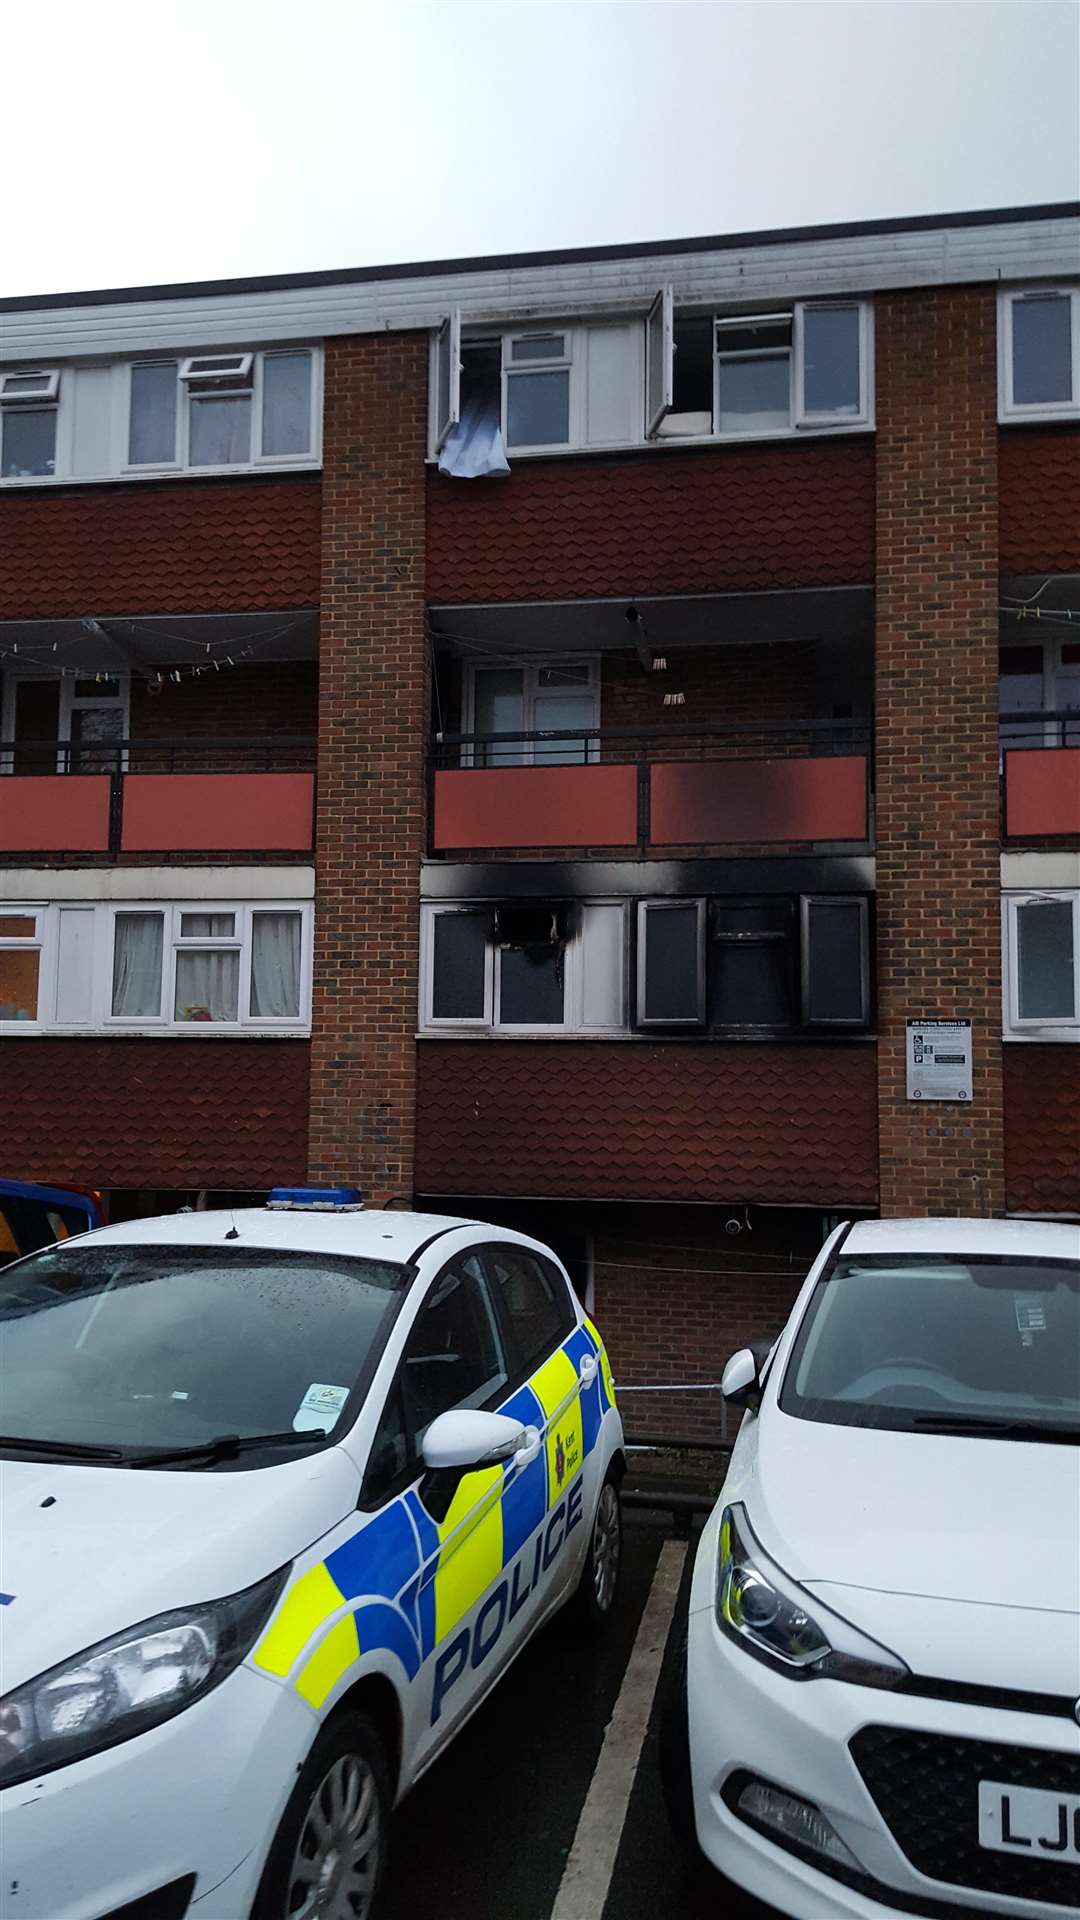 A disabled woman has died after a fire in Walshaw House, off Boxley Road